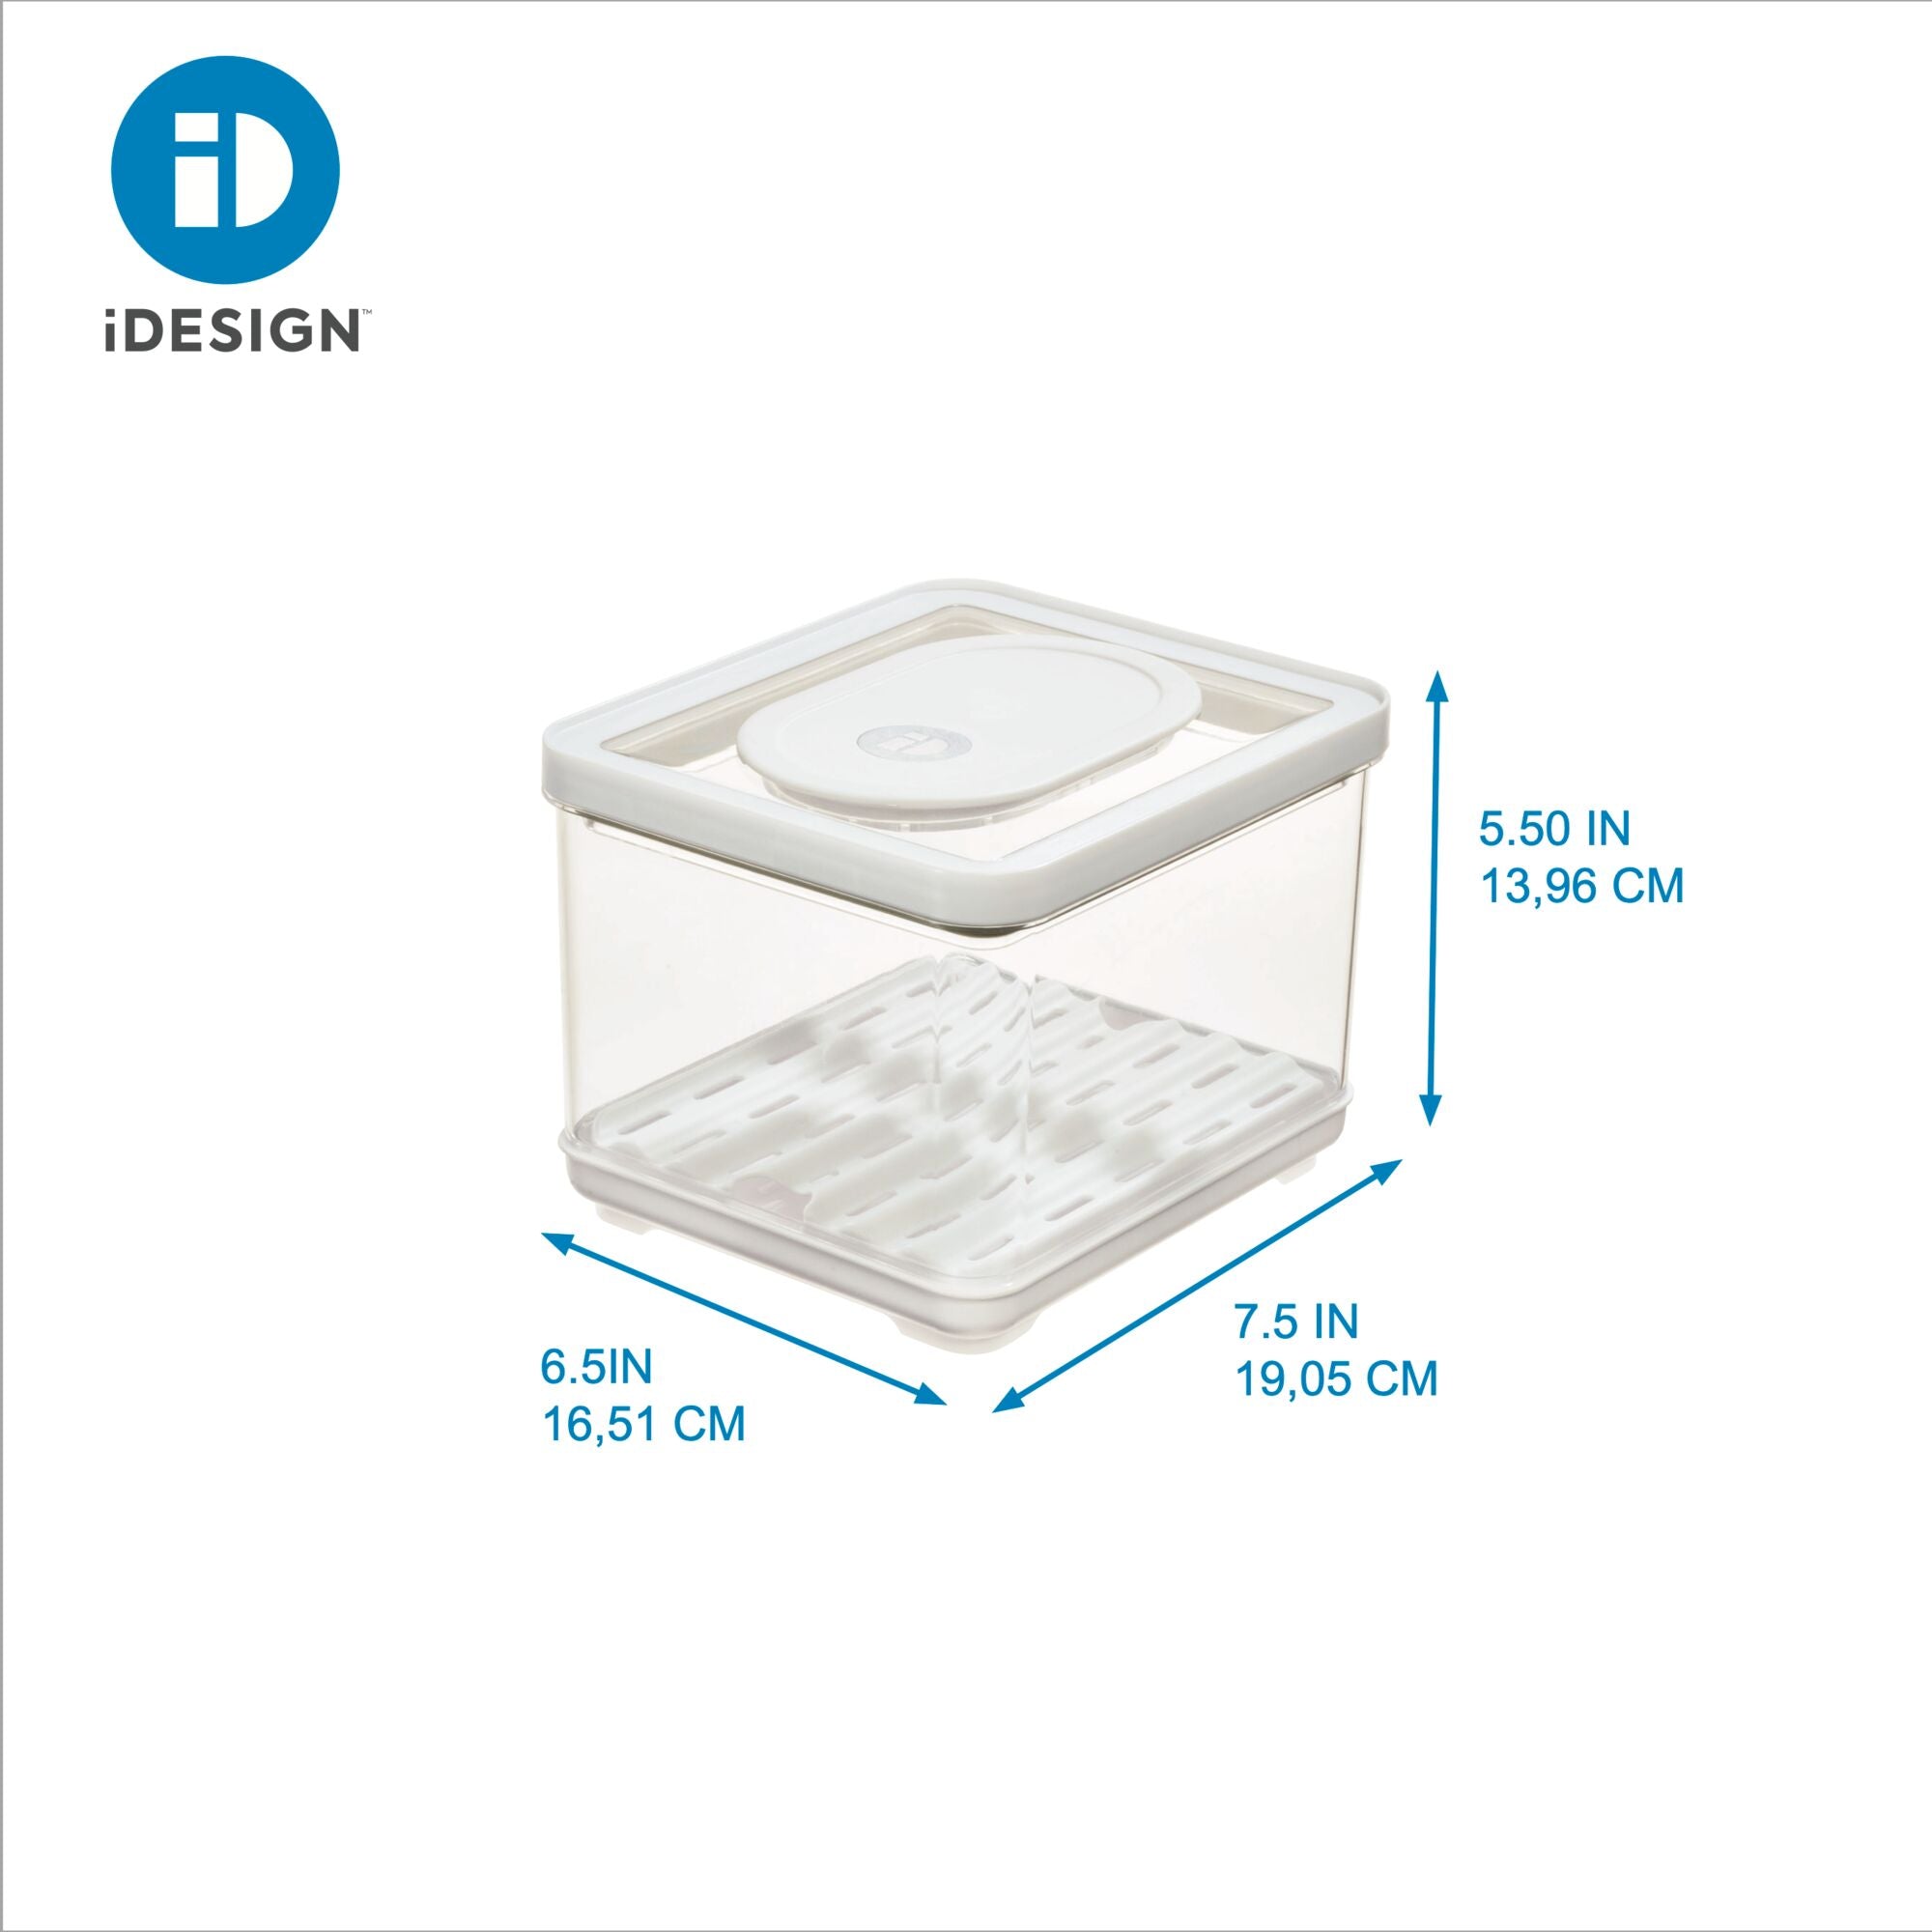 iDesign Crisp Produce Storage Bin made with Recycled Plastic